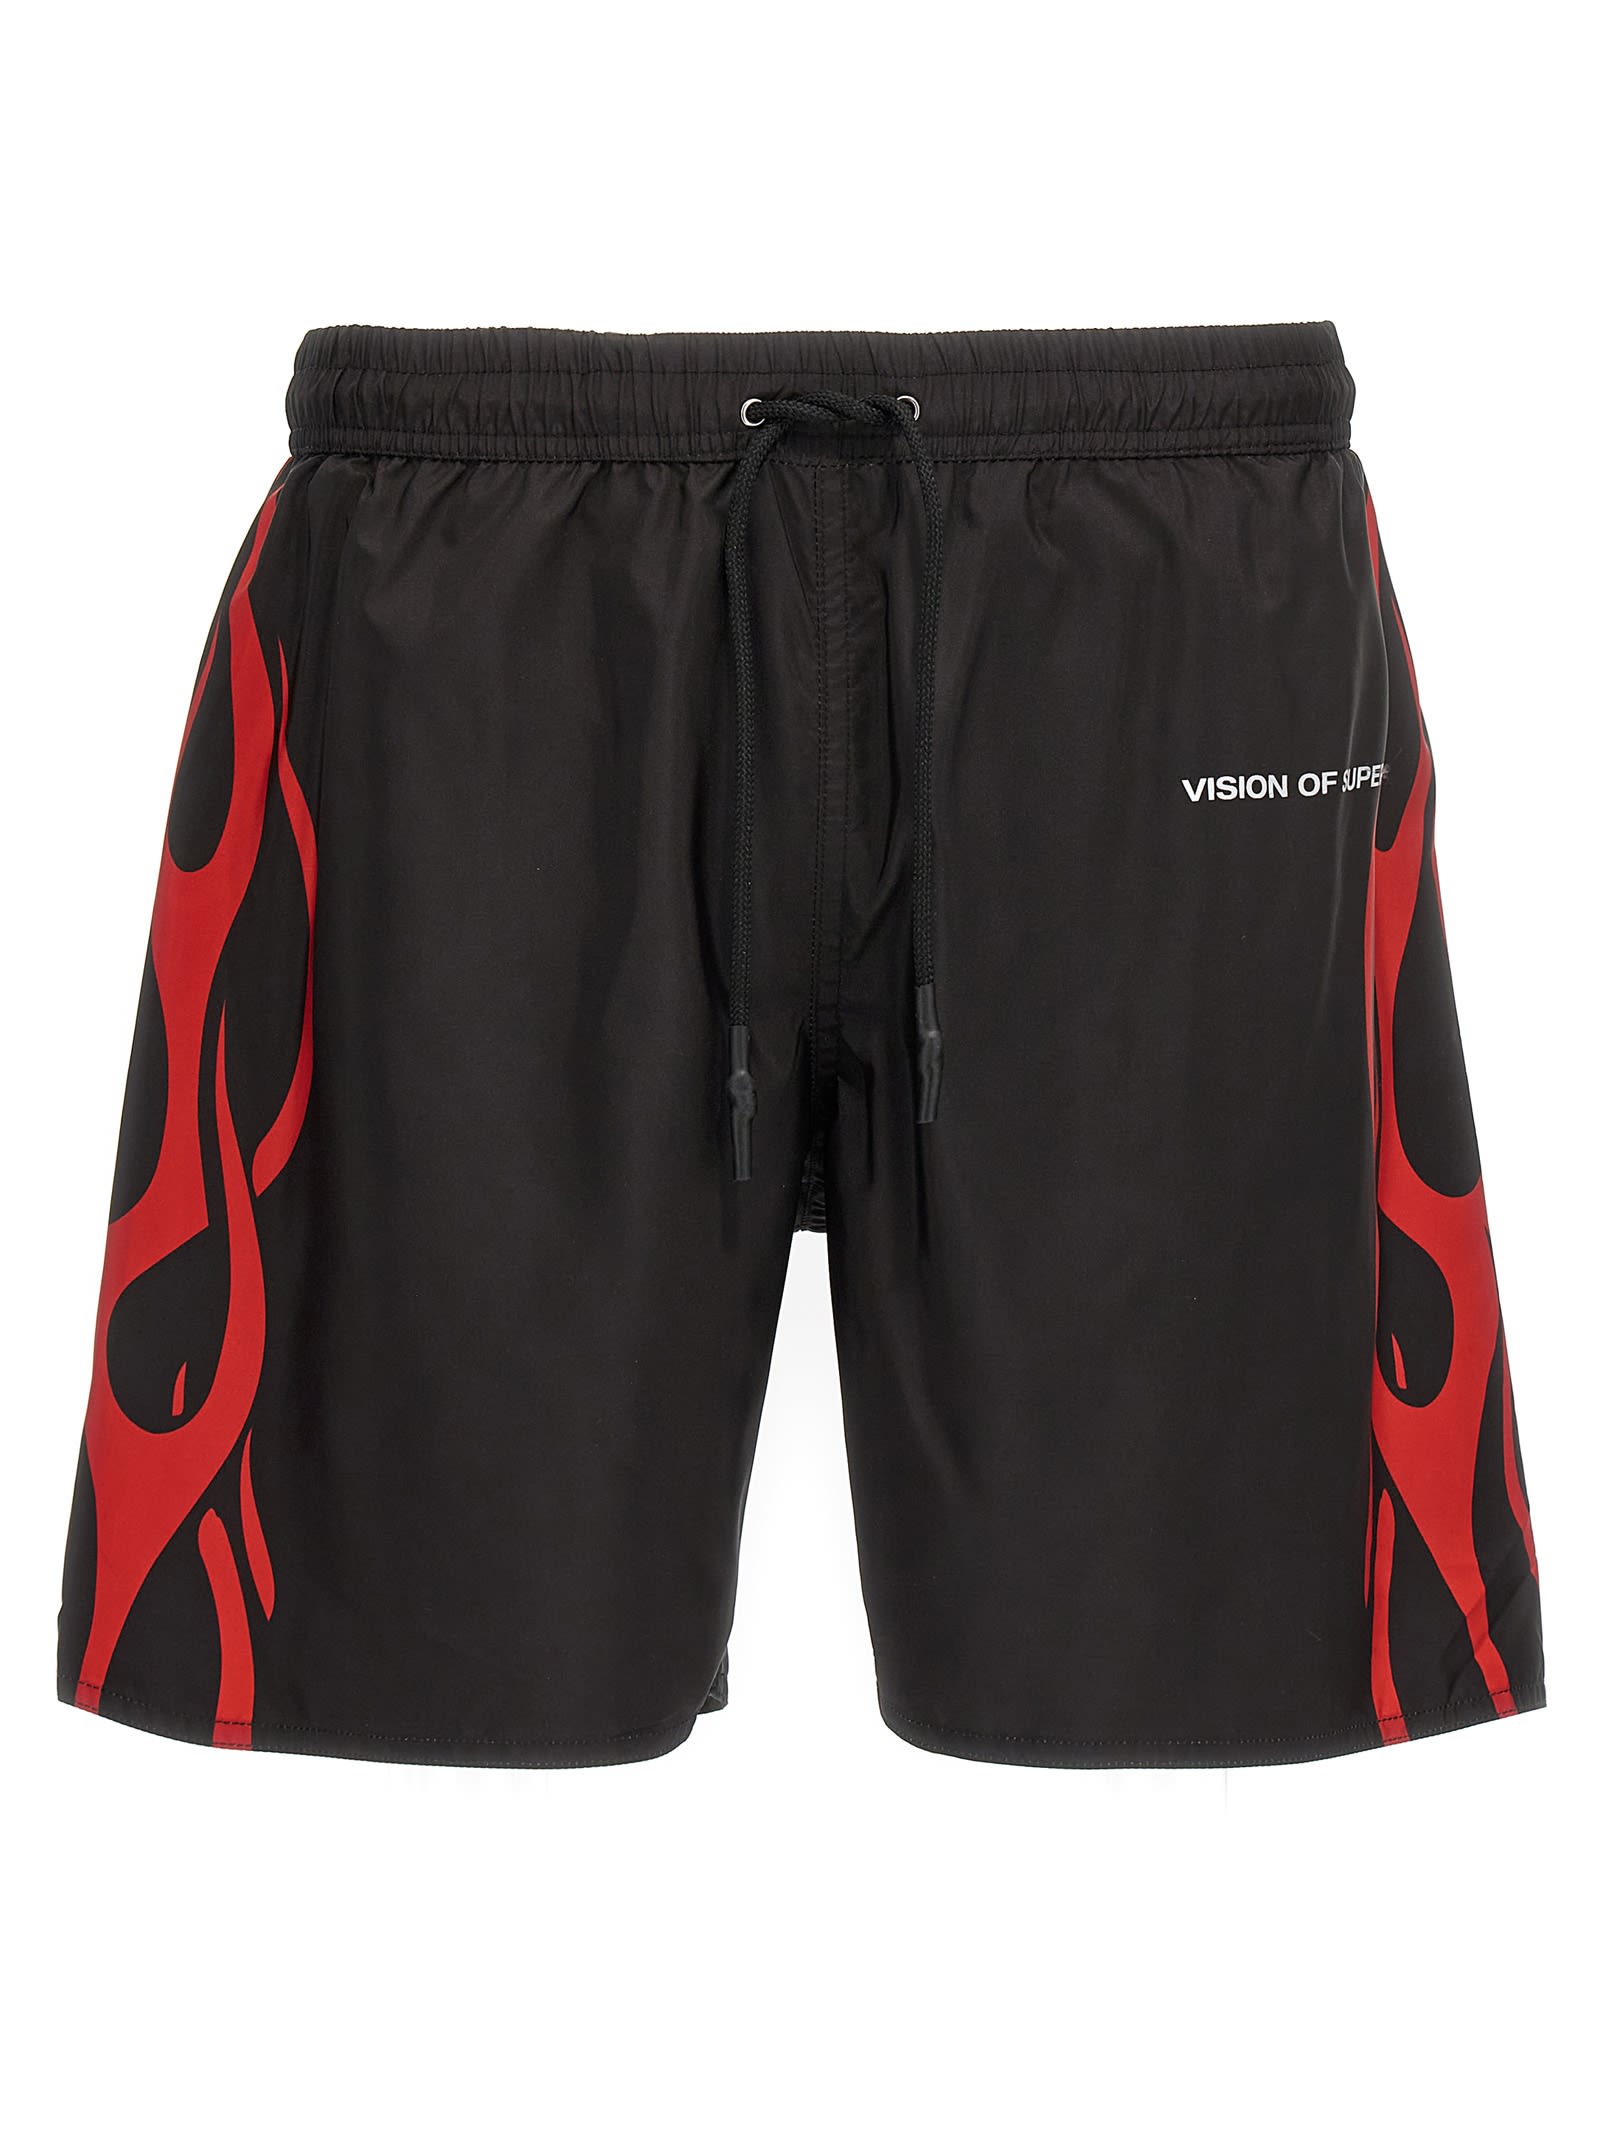 VISION OF SUPER FLAME SWIMMING TRUNKS